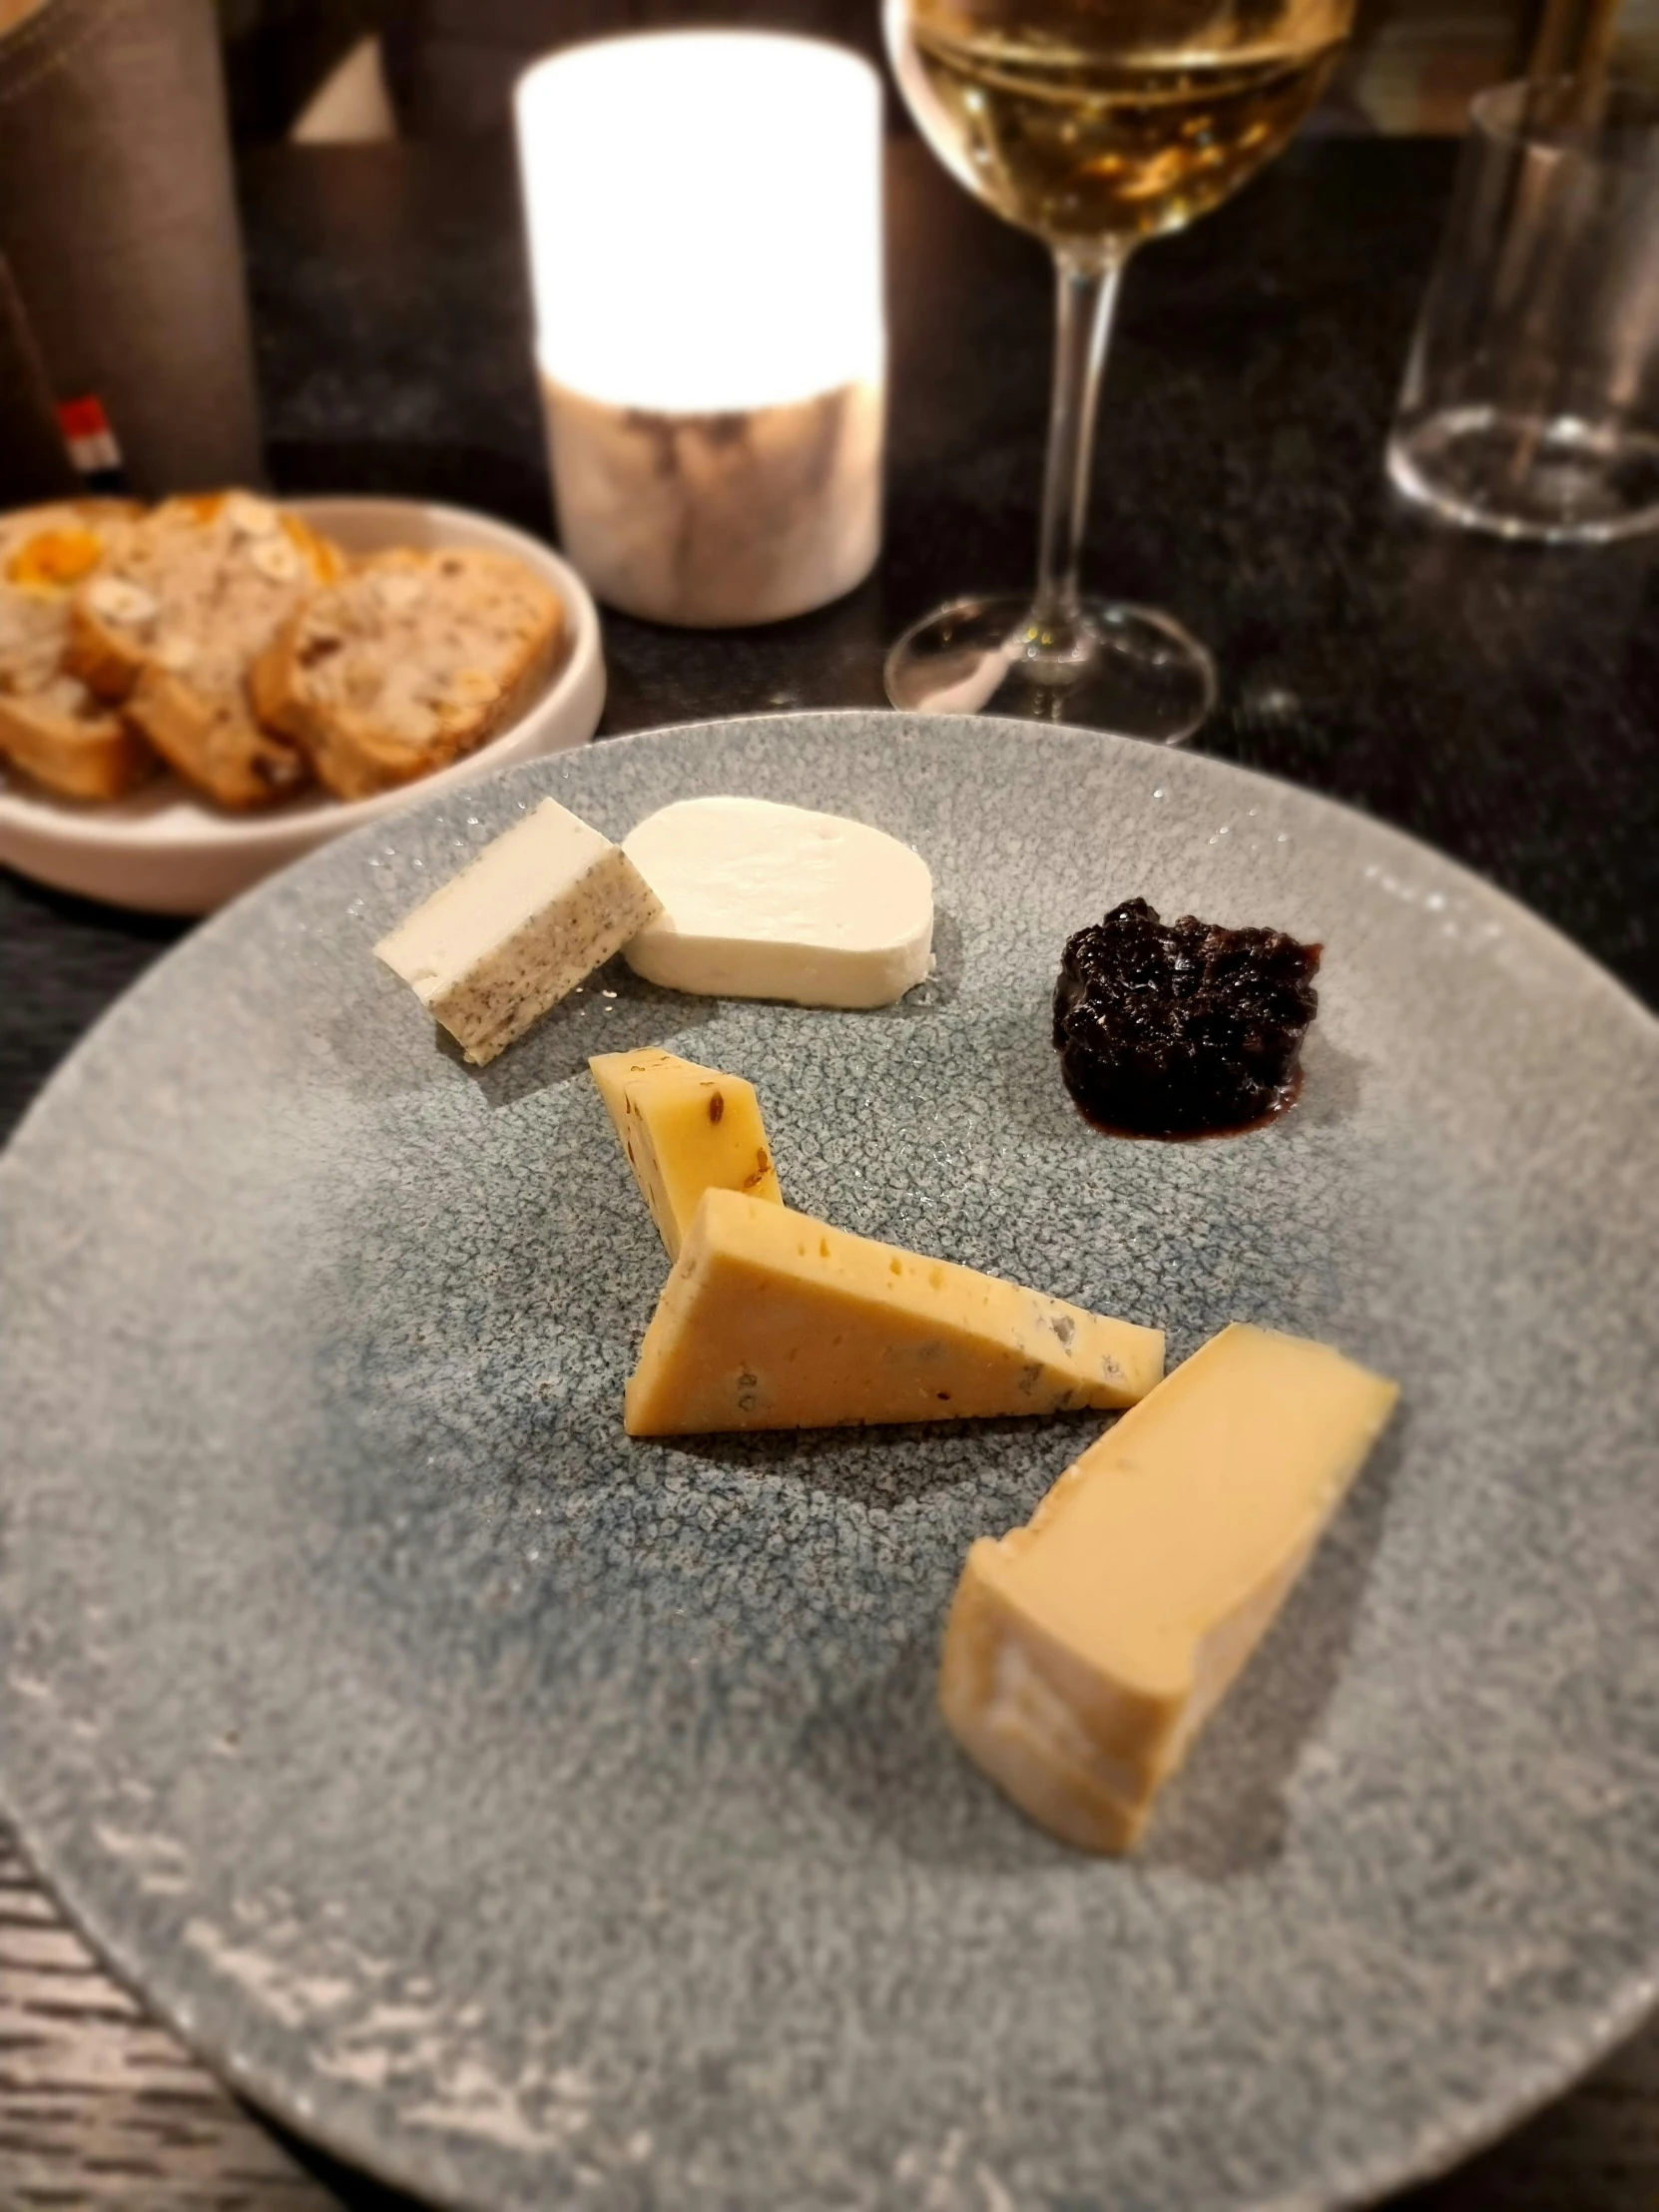 a plate with various cheeses and ers on it